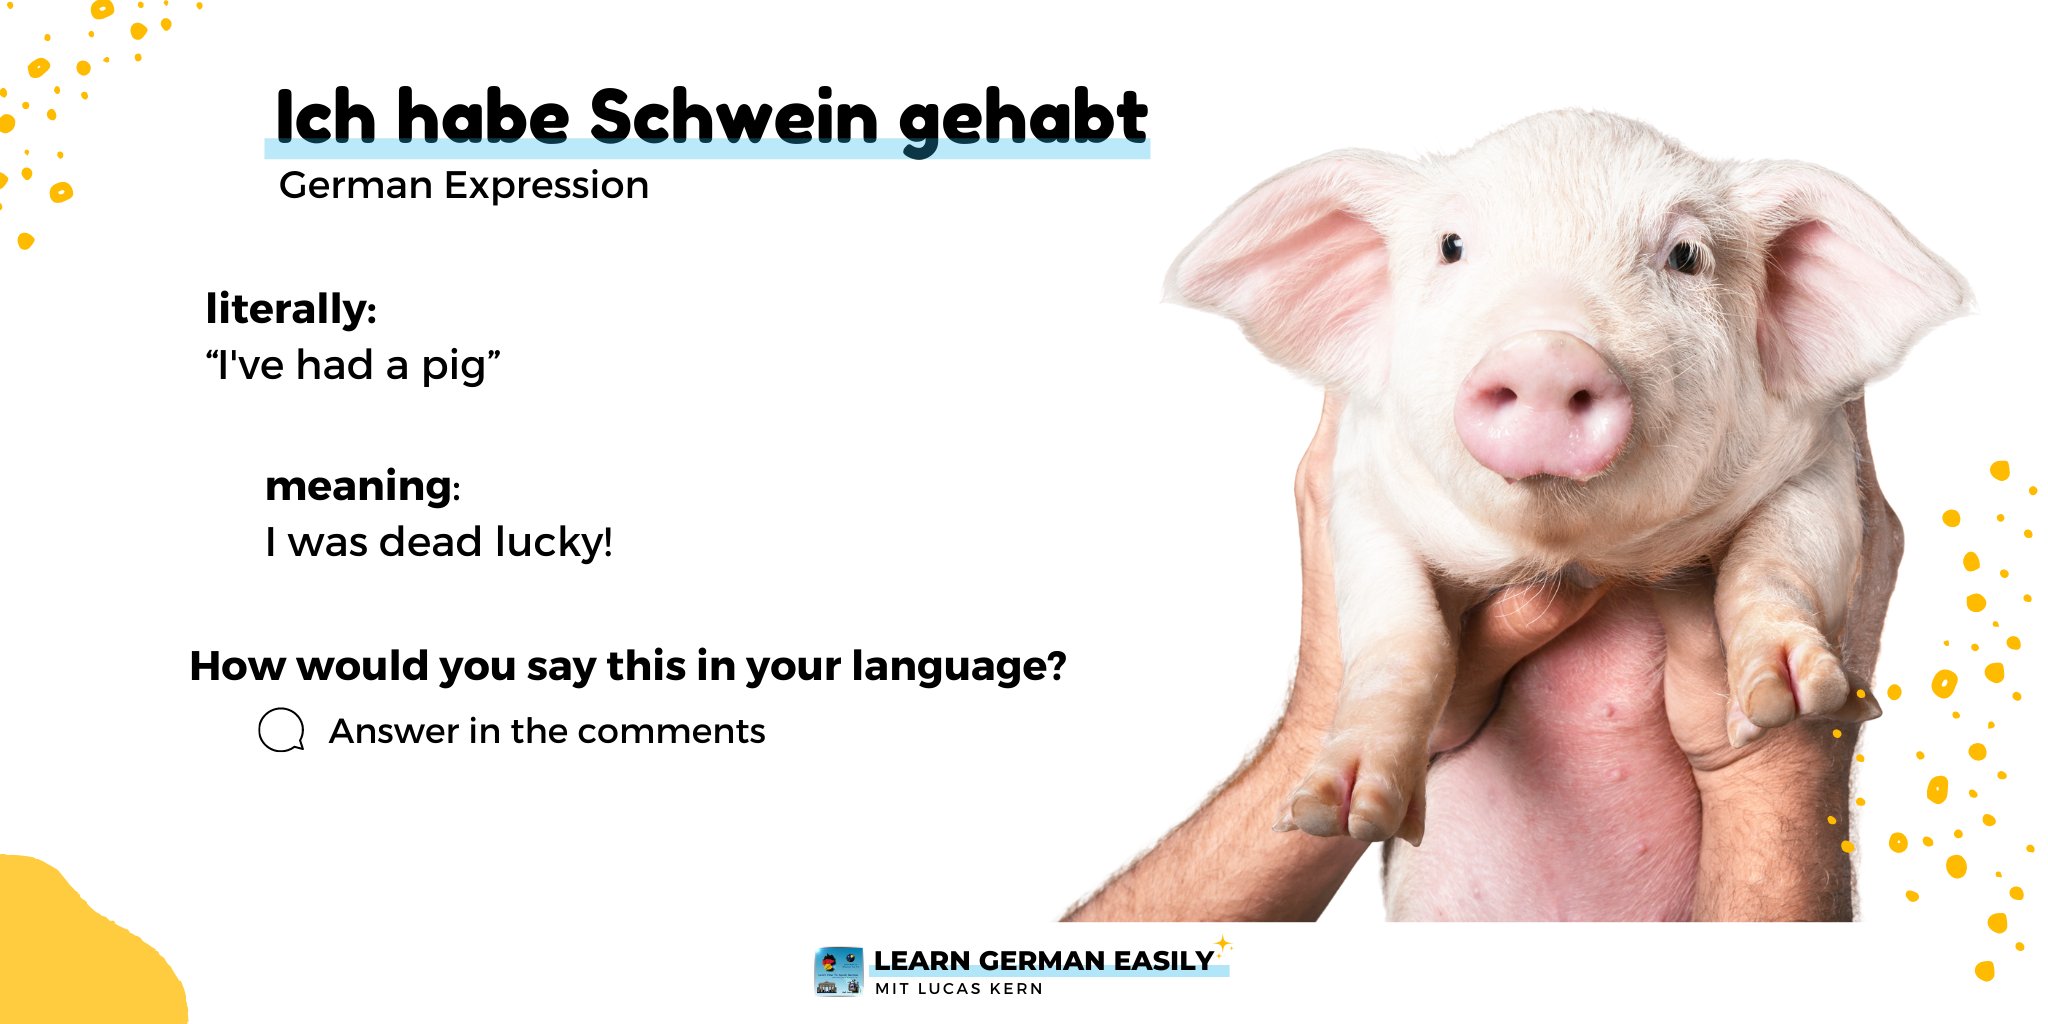 How to pronounce Hhggg in German